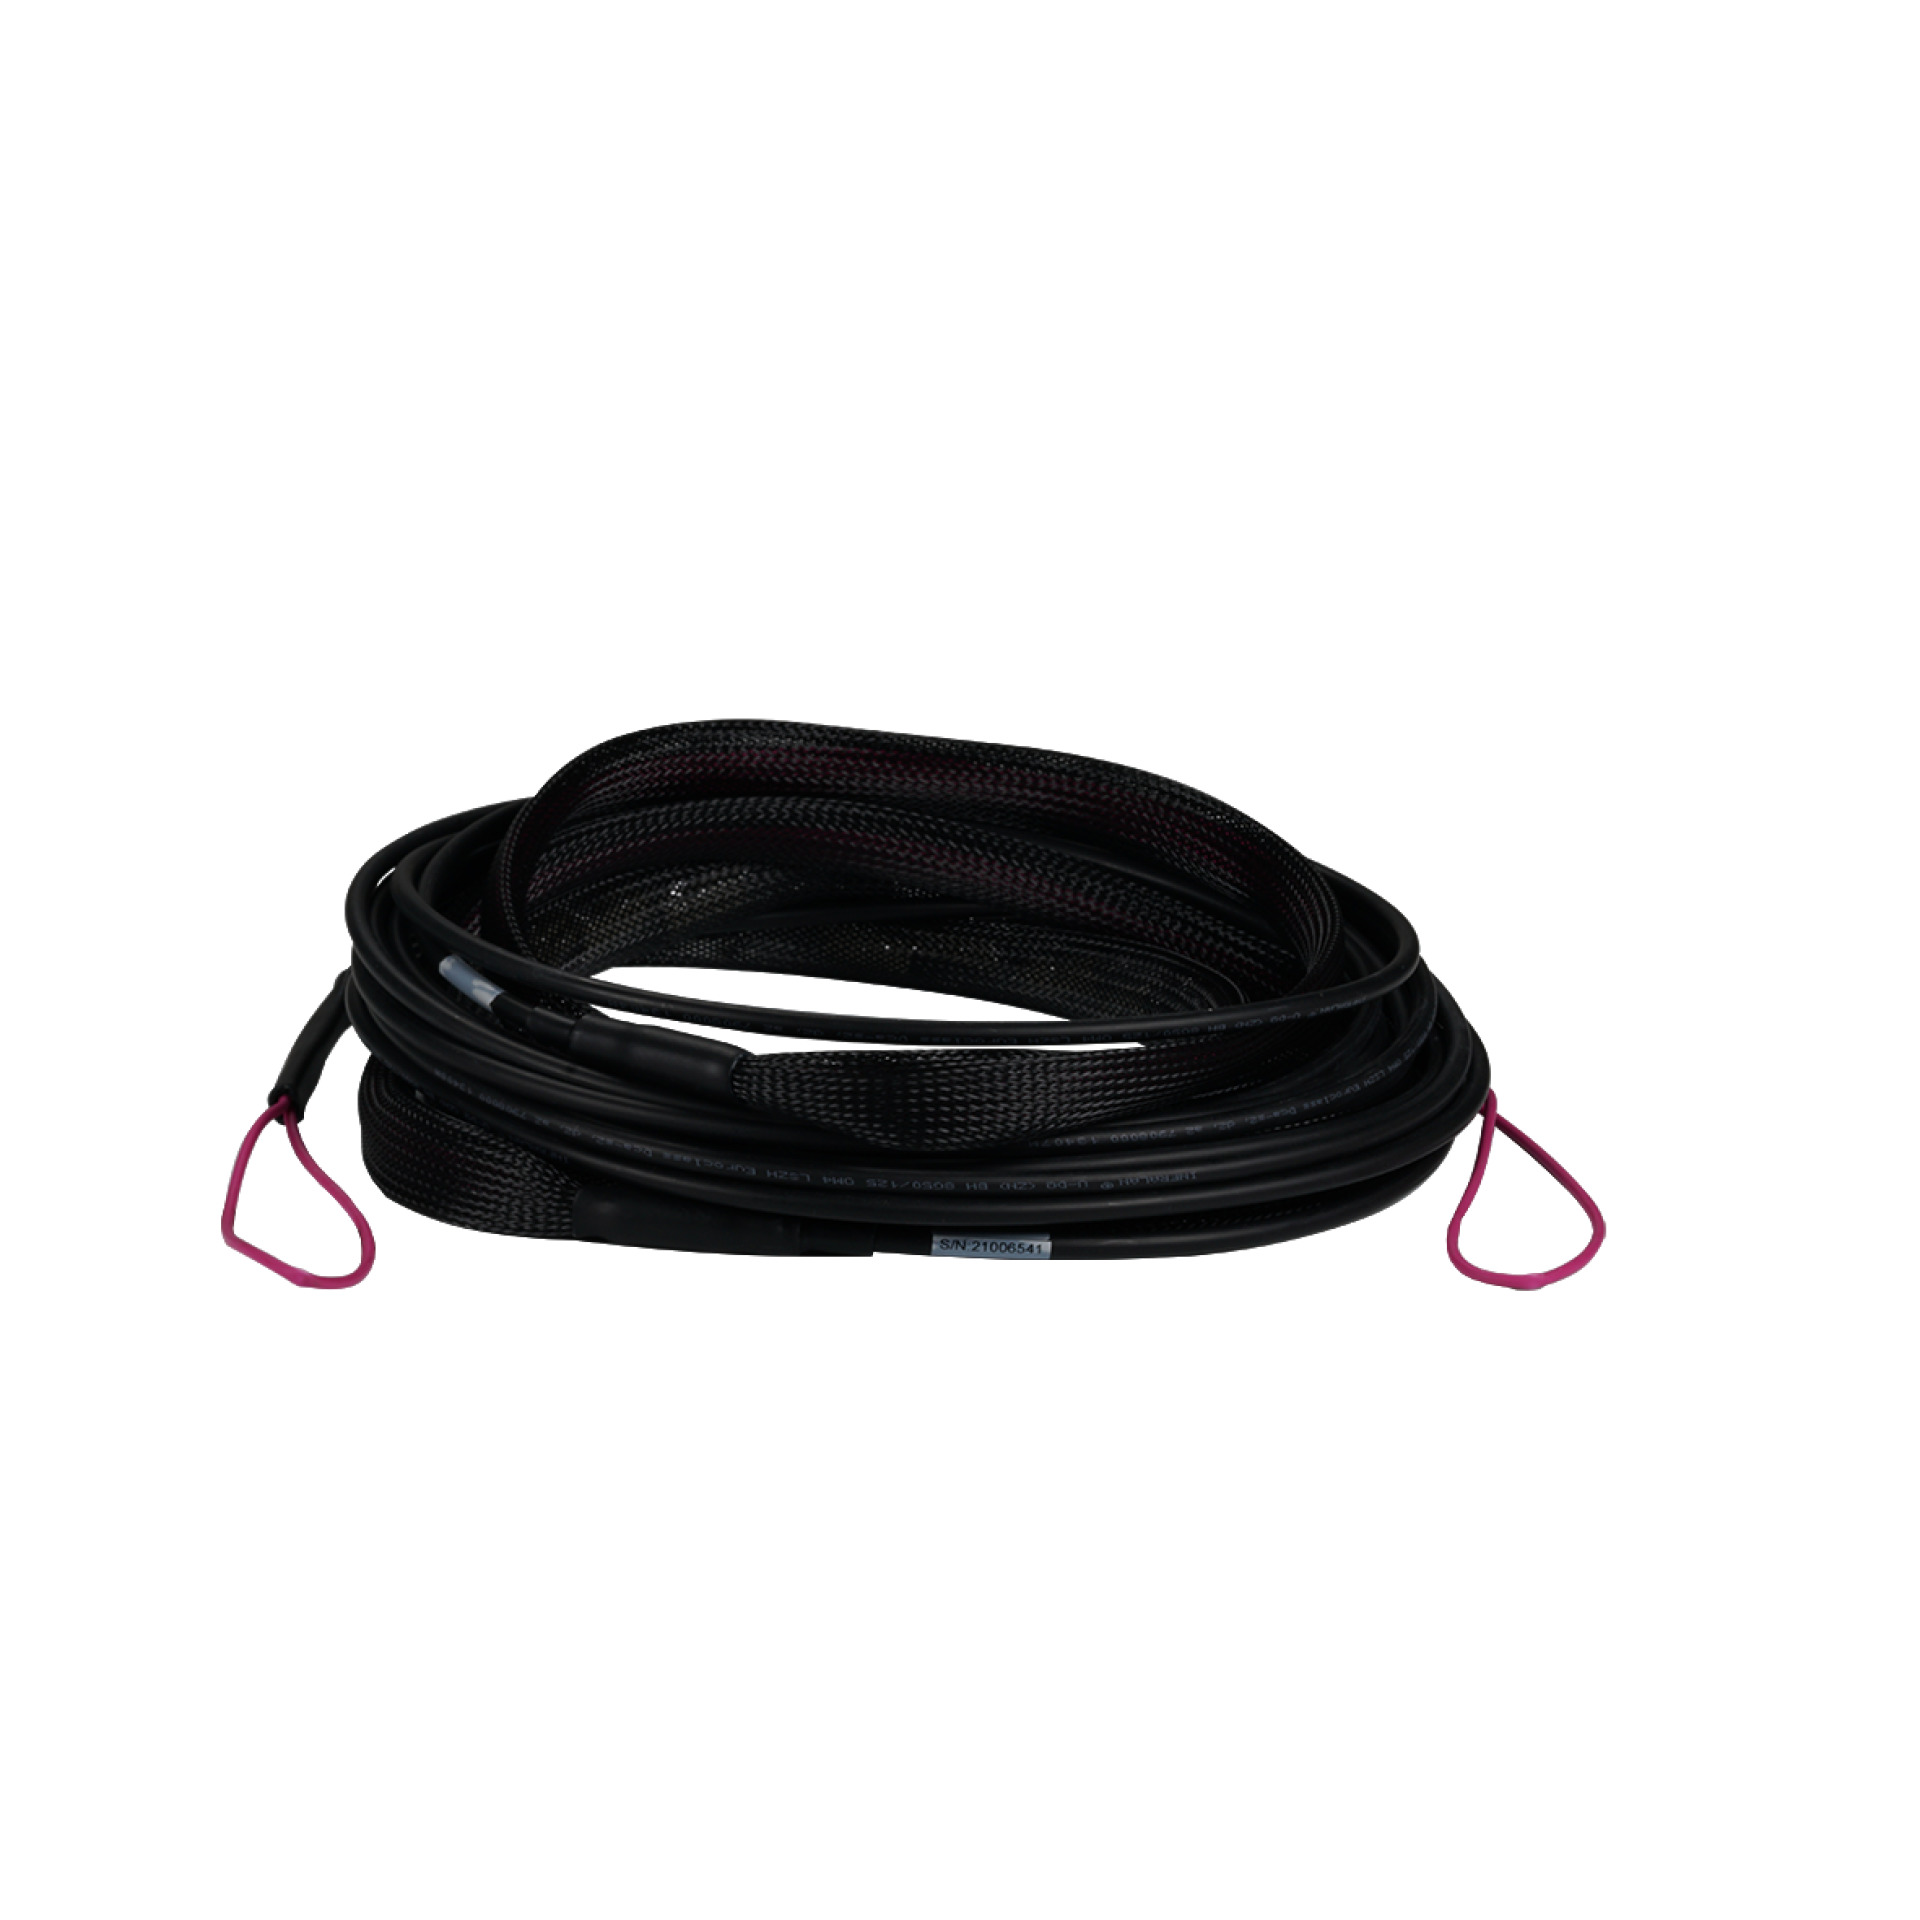 Trunk cable U-DQ(ZN)BH 12G 50/125, SC/SC OM4 60m